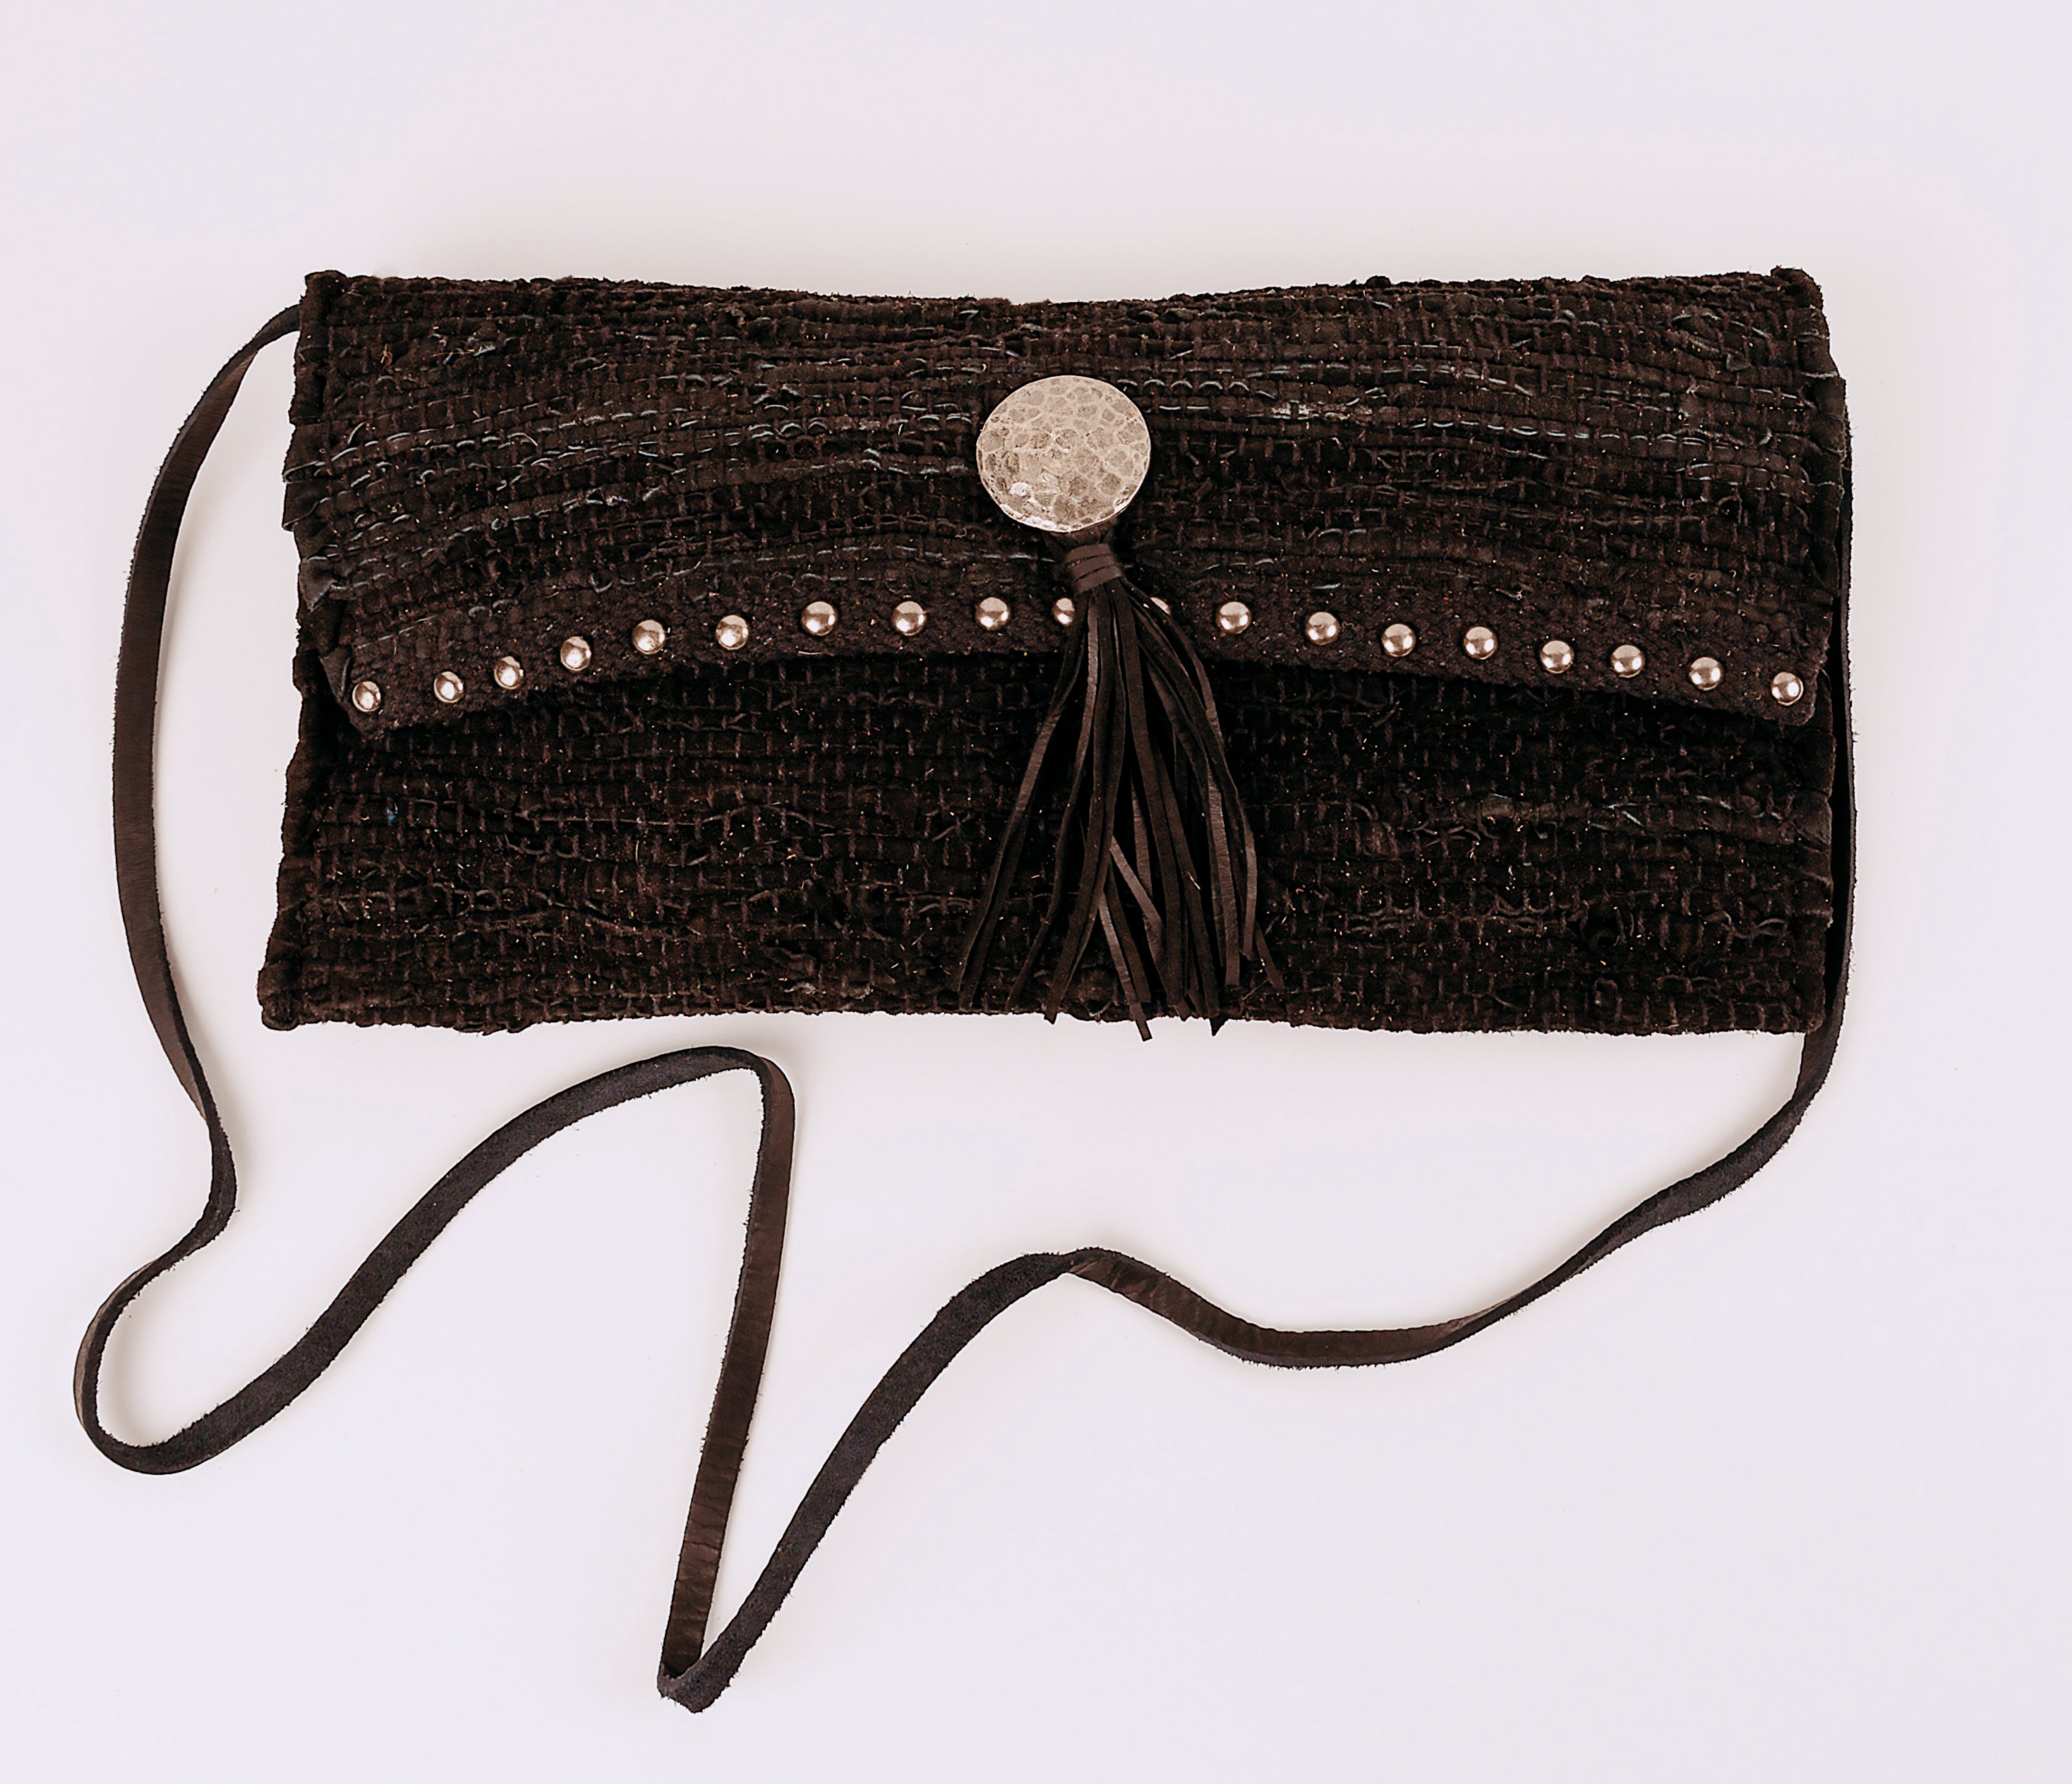 Woven black leather Cross body leather strap